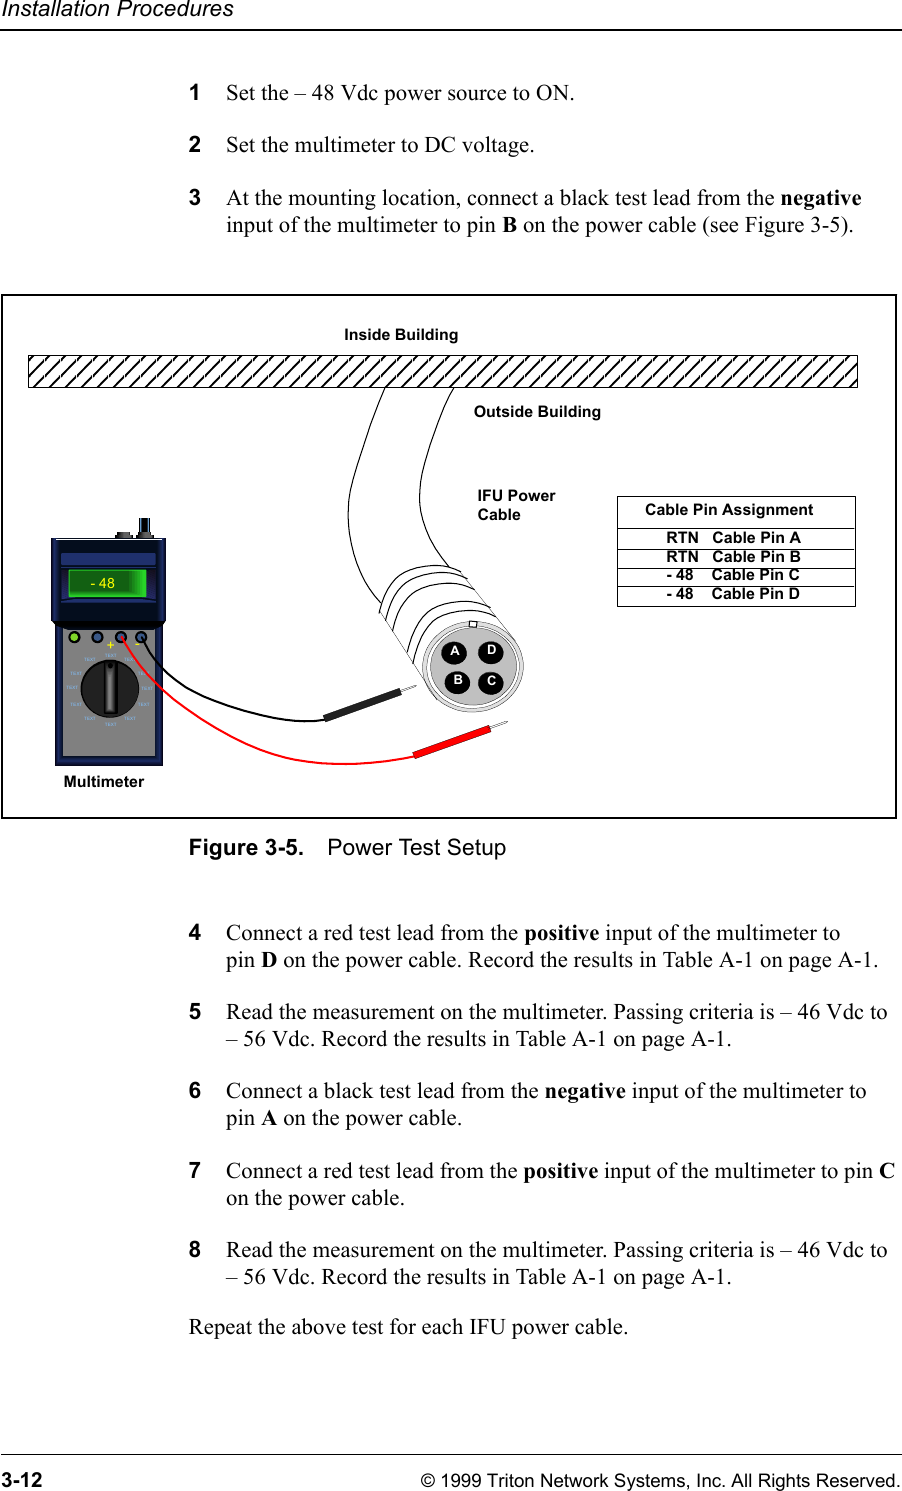 Installation Procedures3-12 © 1999 Triton Network Systems, Inc. All Rights Reserved.1Set the – 48 Vdc power source to ON.2Set the multimeter to DC voltage.3At the mounting location, connect a black test lead from the negative input of the multimeter to pin B on the power cable (see Figure 3-5).Figure 3-5. Power Test Setup4Connect a red test lead from the positive input of the multimeter to pin D on the power cable. Record the results in Table A-1 on page A-1.5Read the measurement on the multimeter. Passing criteria is – 46 Vdc to – 56 Vdc. Record the results in Table A-1 on page A-1.6Connect a black test lead from the negative input of the multimeter to pin A on the power cable.7Connect a red test lead from the positive input of the multimeter to pin C on the power cable.8Read the measurement on the multimeter. Passing criteria is – 46 Vdc to – 56 Vdc. Record the results in Table A-1 on page A-1.Repeat the above test for each IFU power cable.TEXTTEXTTEXT TEXTTEXT TEXTTEXT TEXTTEXT TEXTTEXTTEXT- 48+- MultimeterRTN   Cable Pin ARTN   Cable Pin B- 48    Cable Pin C- 48    Cable Pin DCable Pin AssignmentAIFU Power CableDBCOutside BuildingInside Building